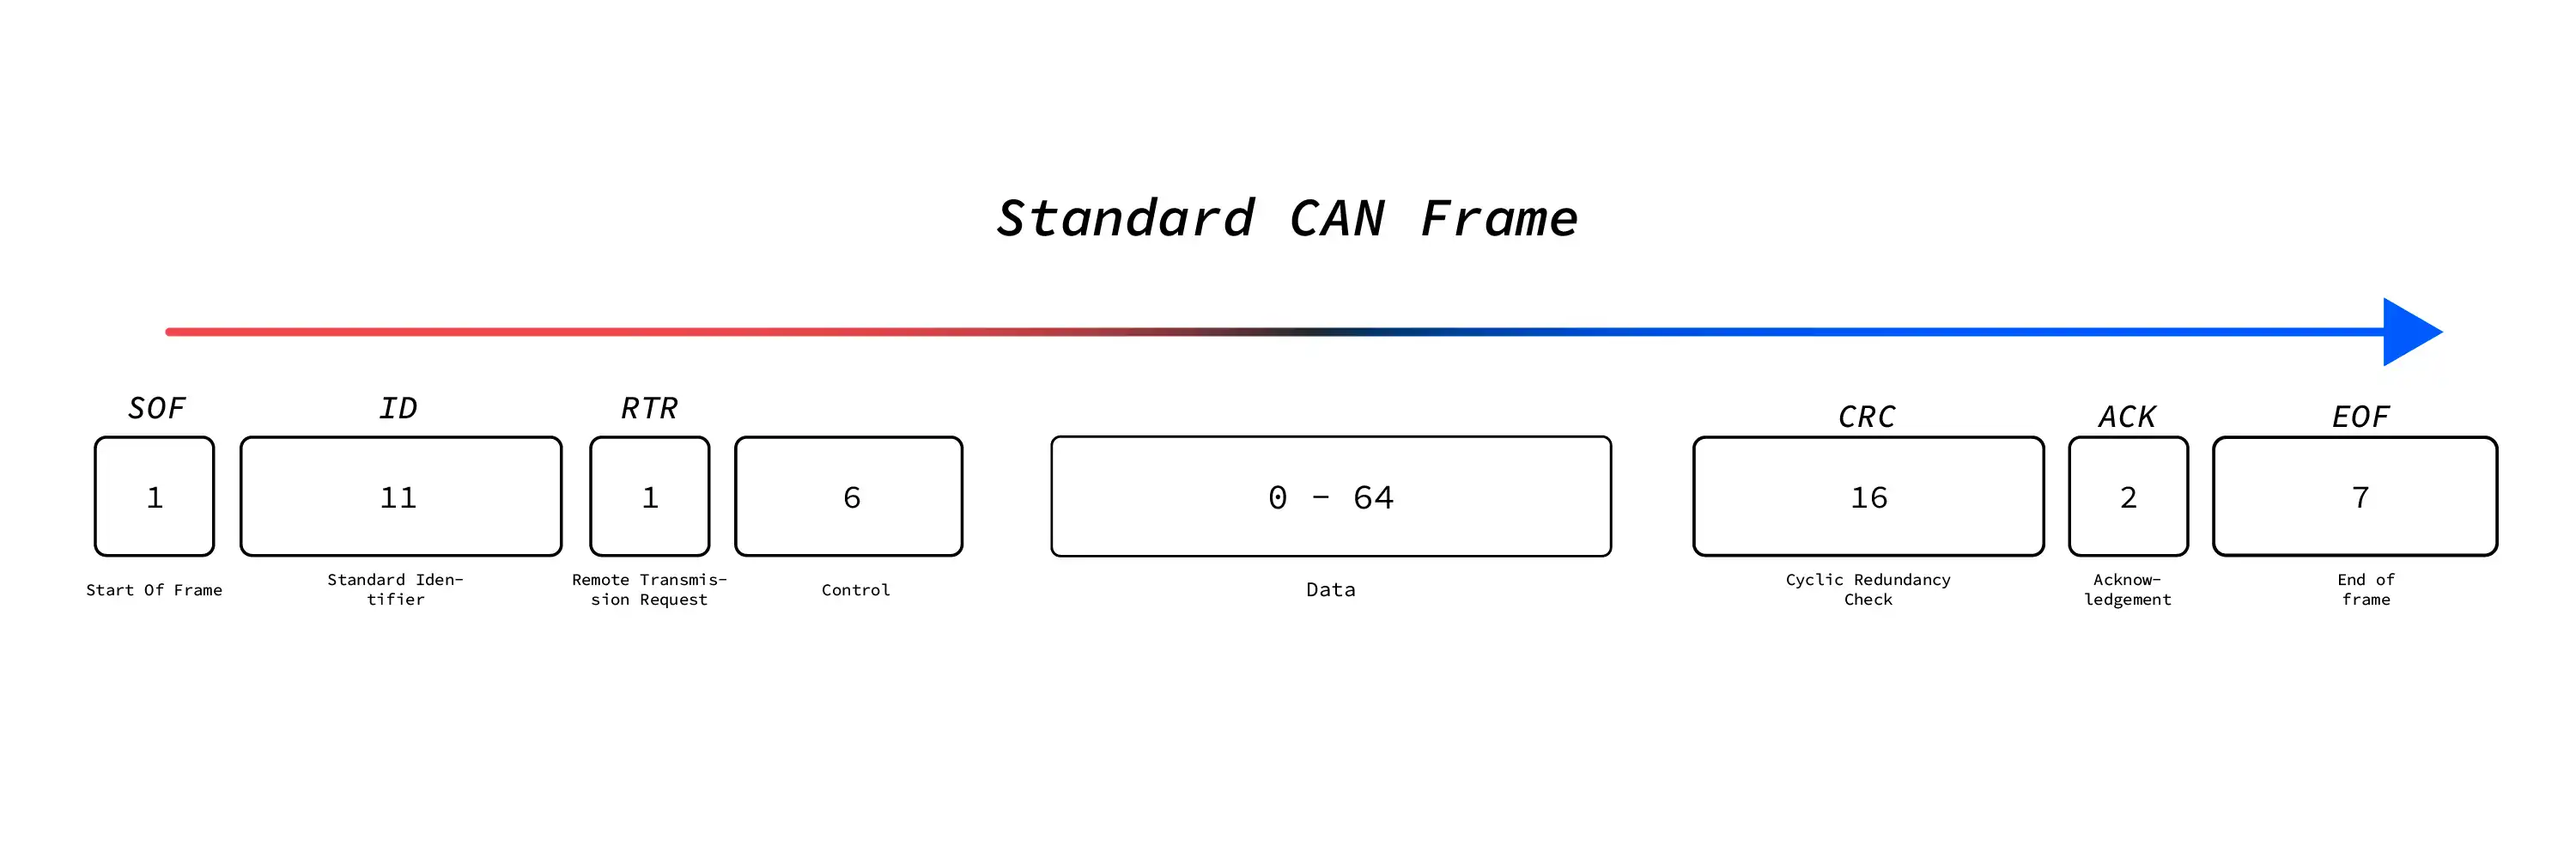 How a typical standard CAN message frame looks like